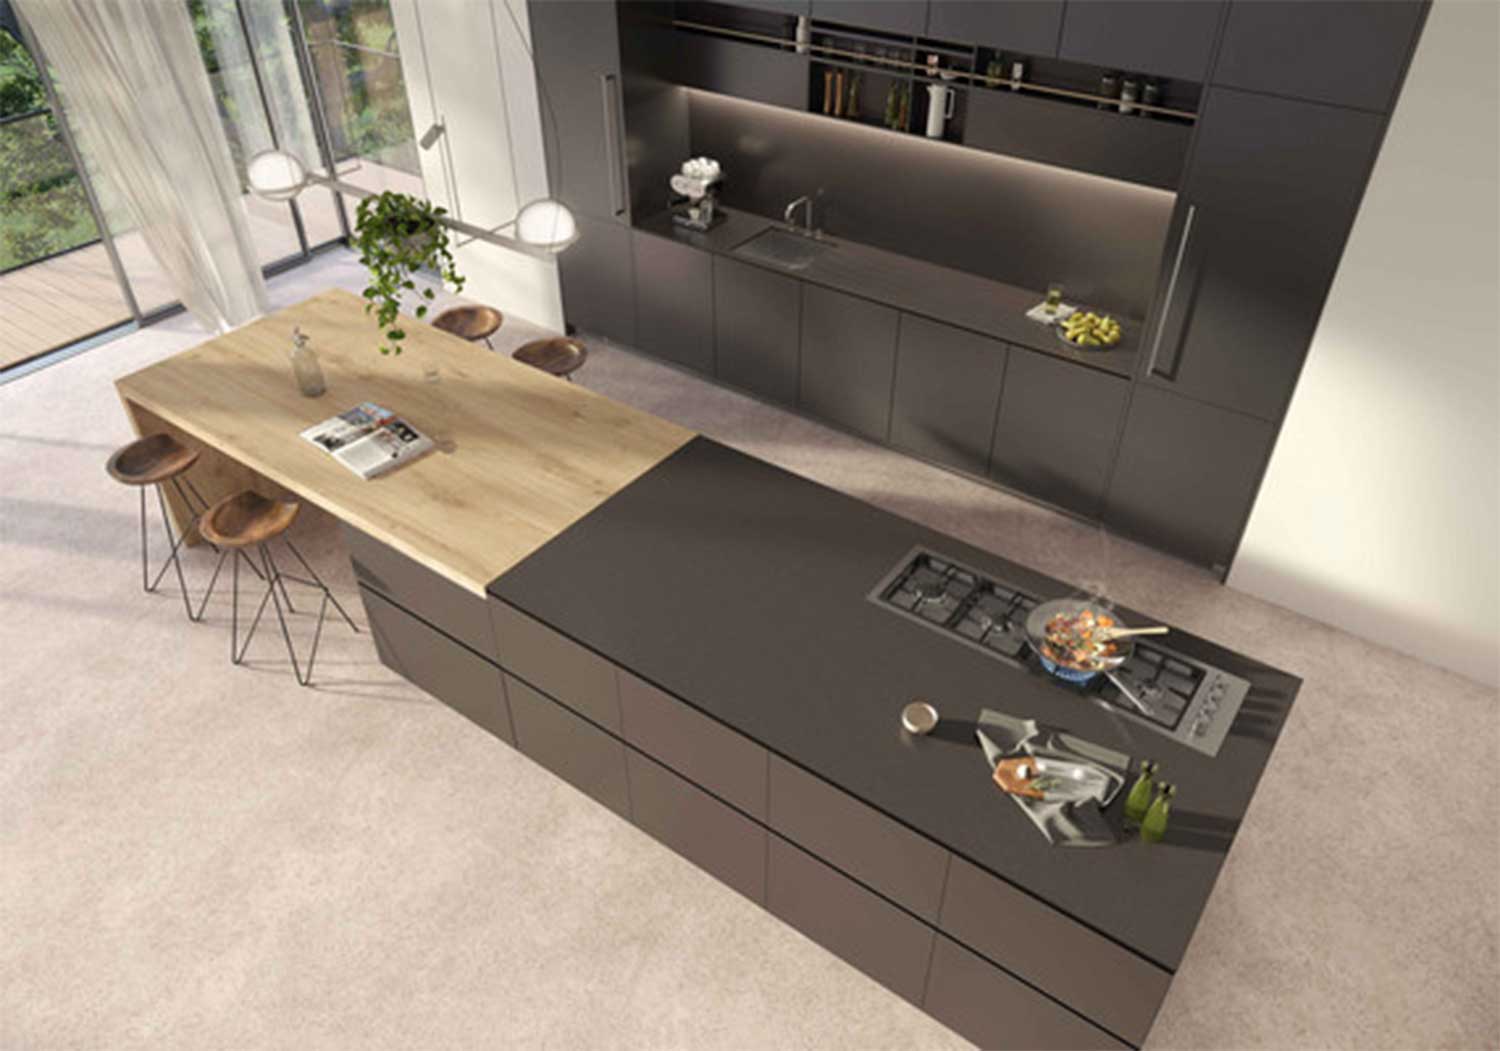 Fundermax worktops: design and functionality in the kitchen